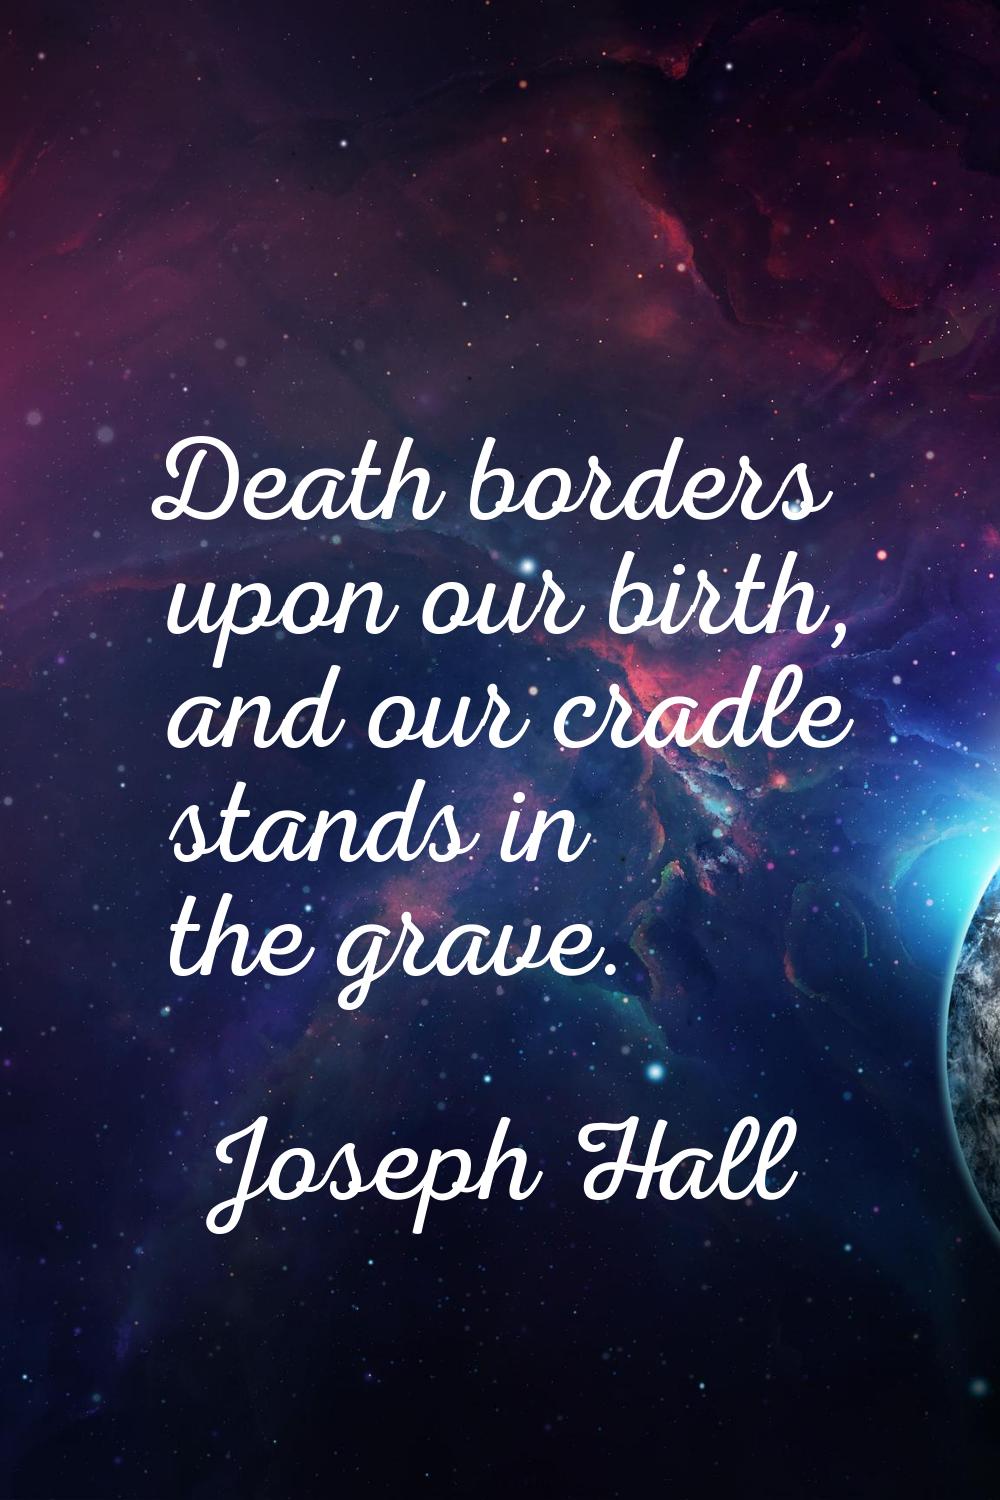 Death borders upon our birth, and our cradle stands in the grave.